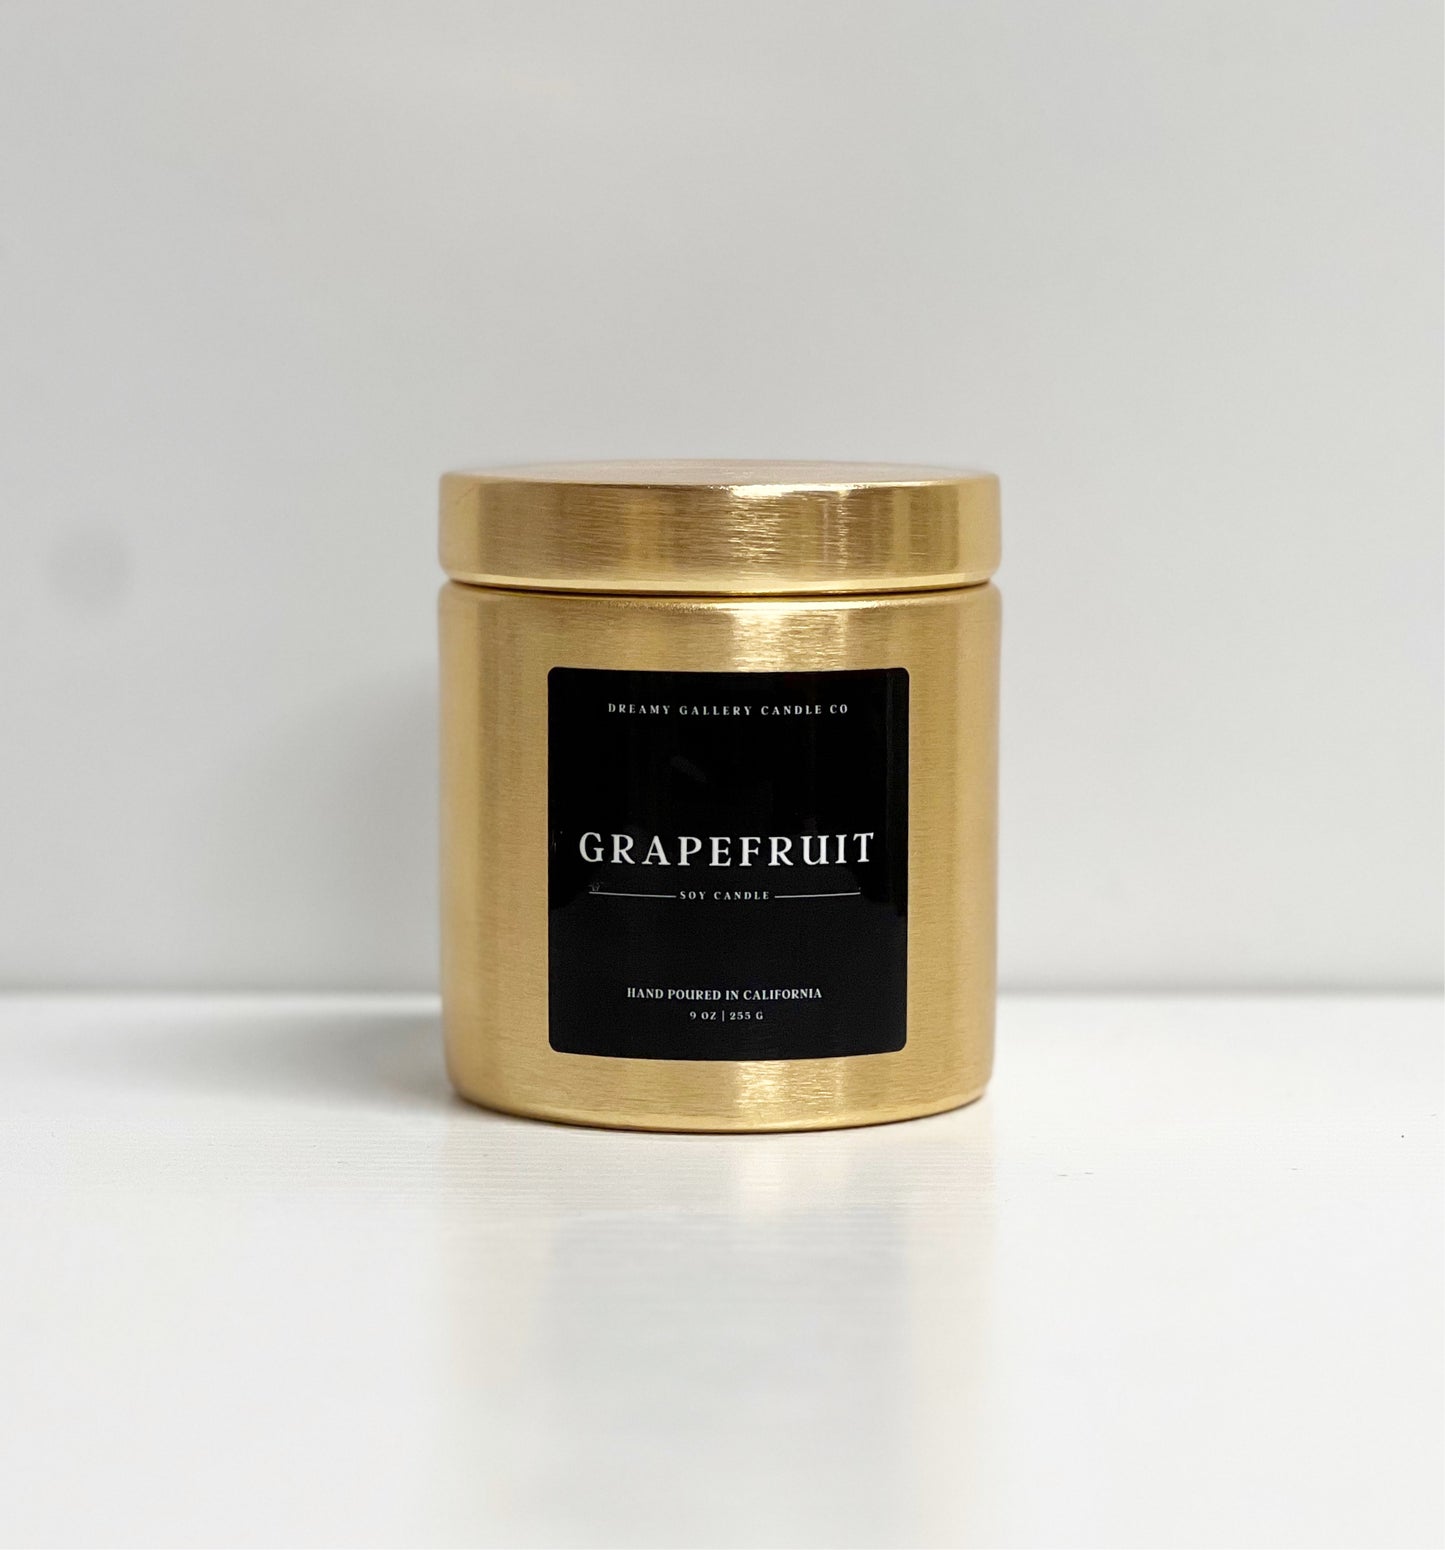 GRAPEFRUIT CLASSIC SOY CANDLE